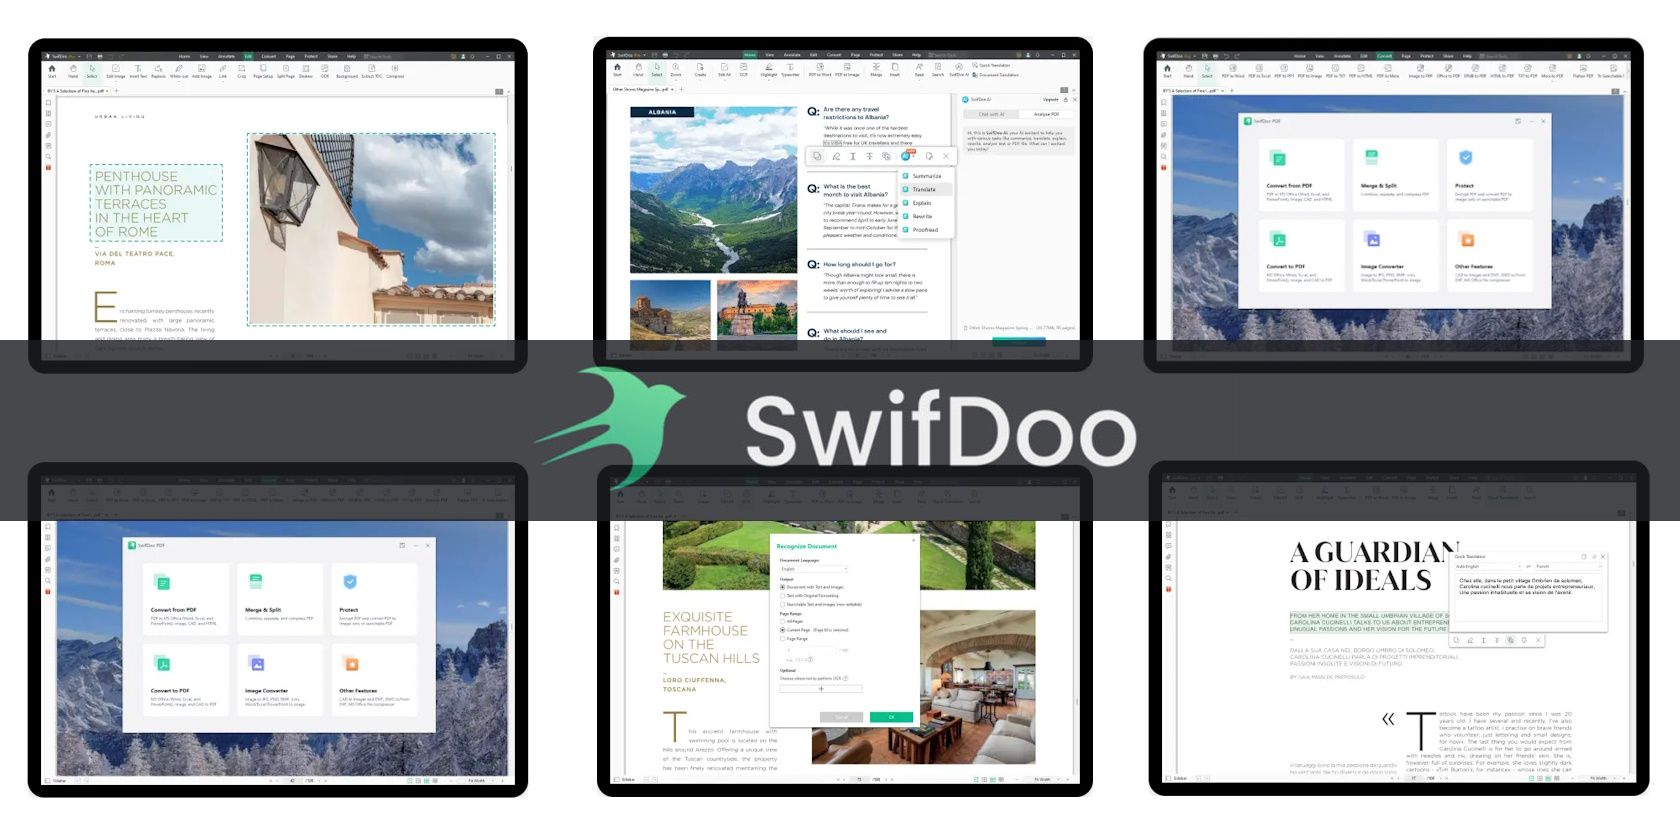 swifdoo pdf tool showing various different features